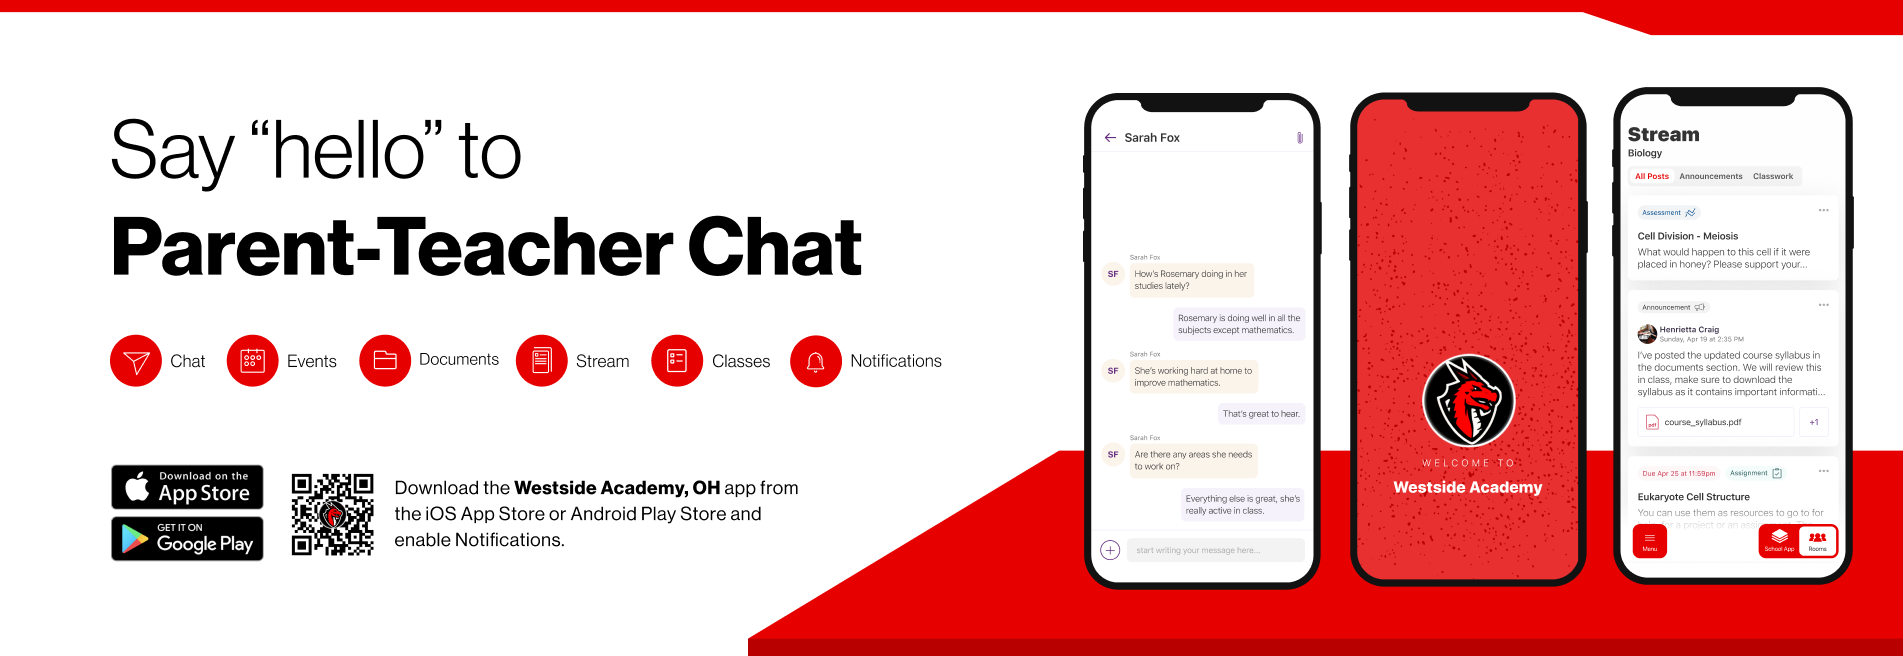 Say hello to Parent-Teacher chat in the new Rooms app. Download the Westside Academy app in the Google Play or Apple App store.